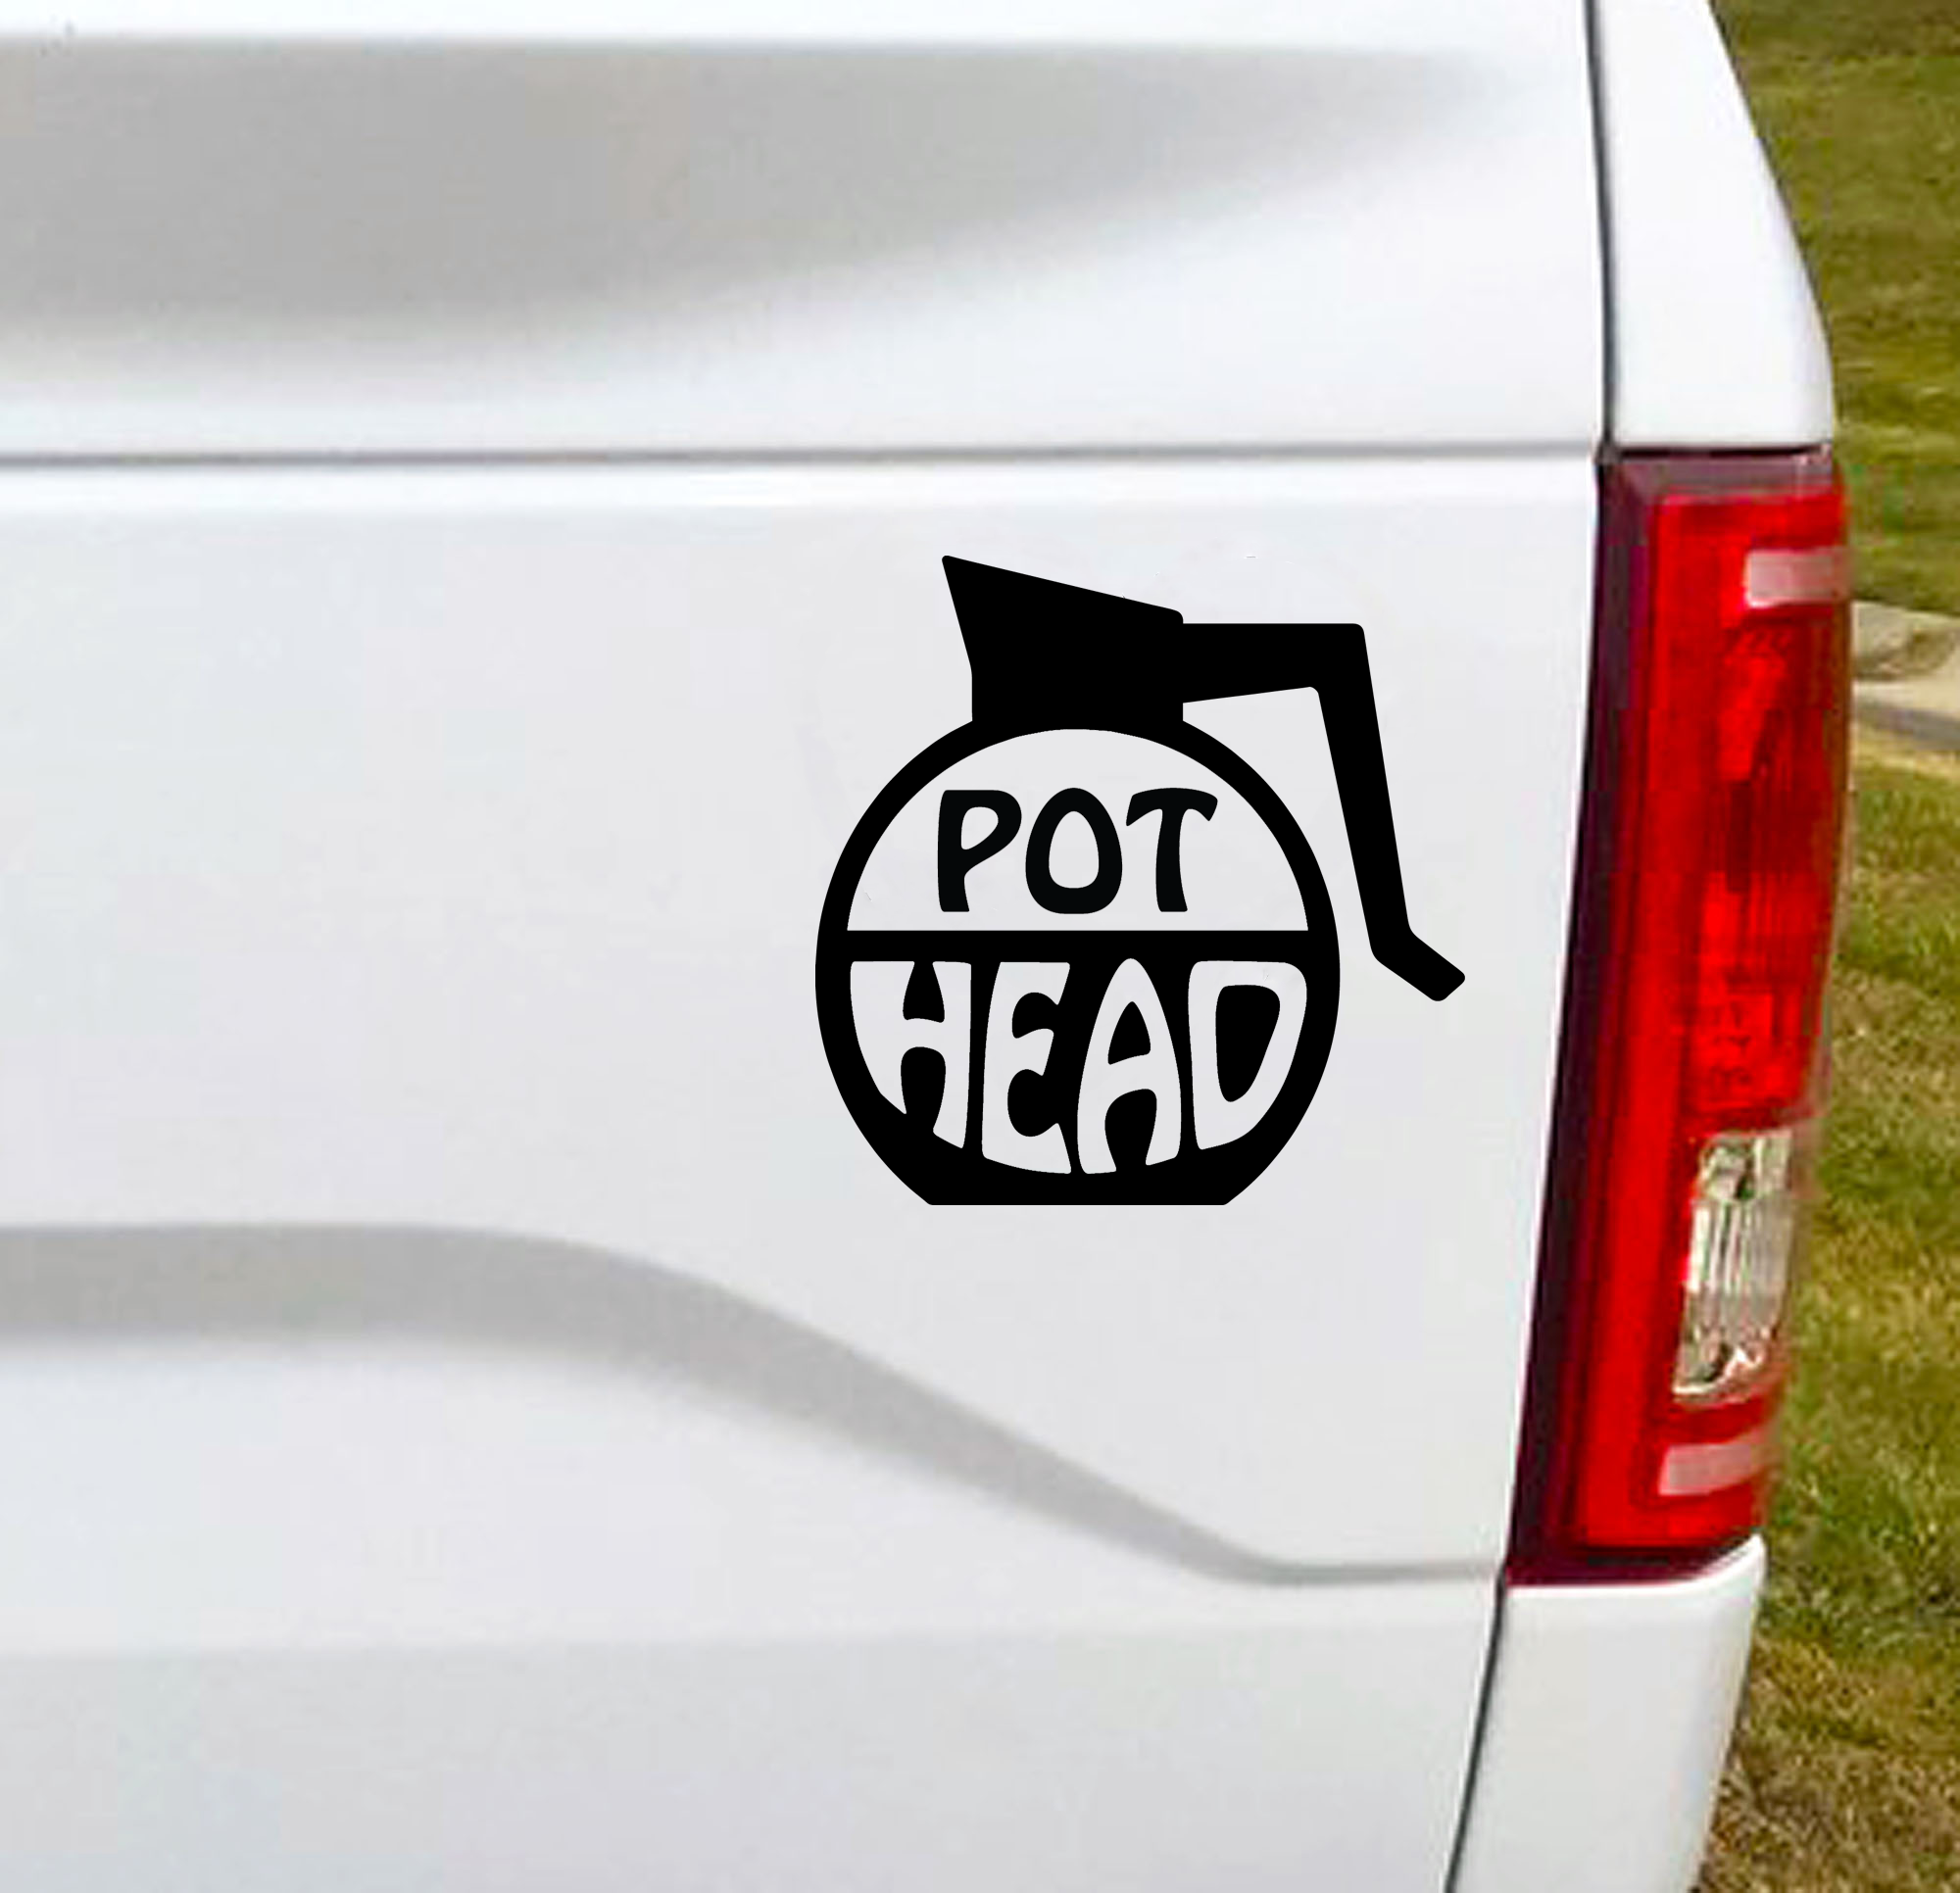 Pot Head funny vinyl car decal bumper sticker. REALLY like your coffee? You might be a Pot Head.  5.5"W x 5.5"H Funny Car Decal, Car Sticker, Car Vinyl, Bumper Sticker, Vinyl Stickers, Vinyl Sticker.  FREE SHIPPING FOR ALL VINYL DECALS within Canada and the US.